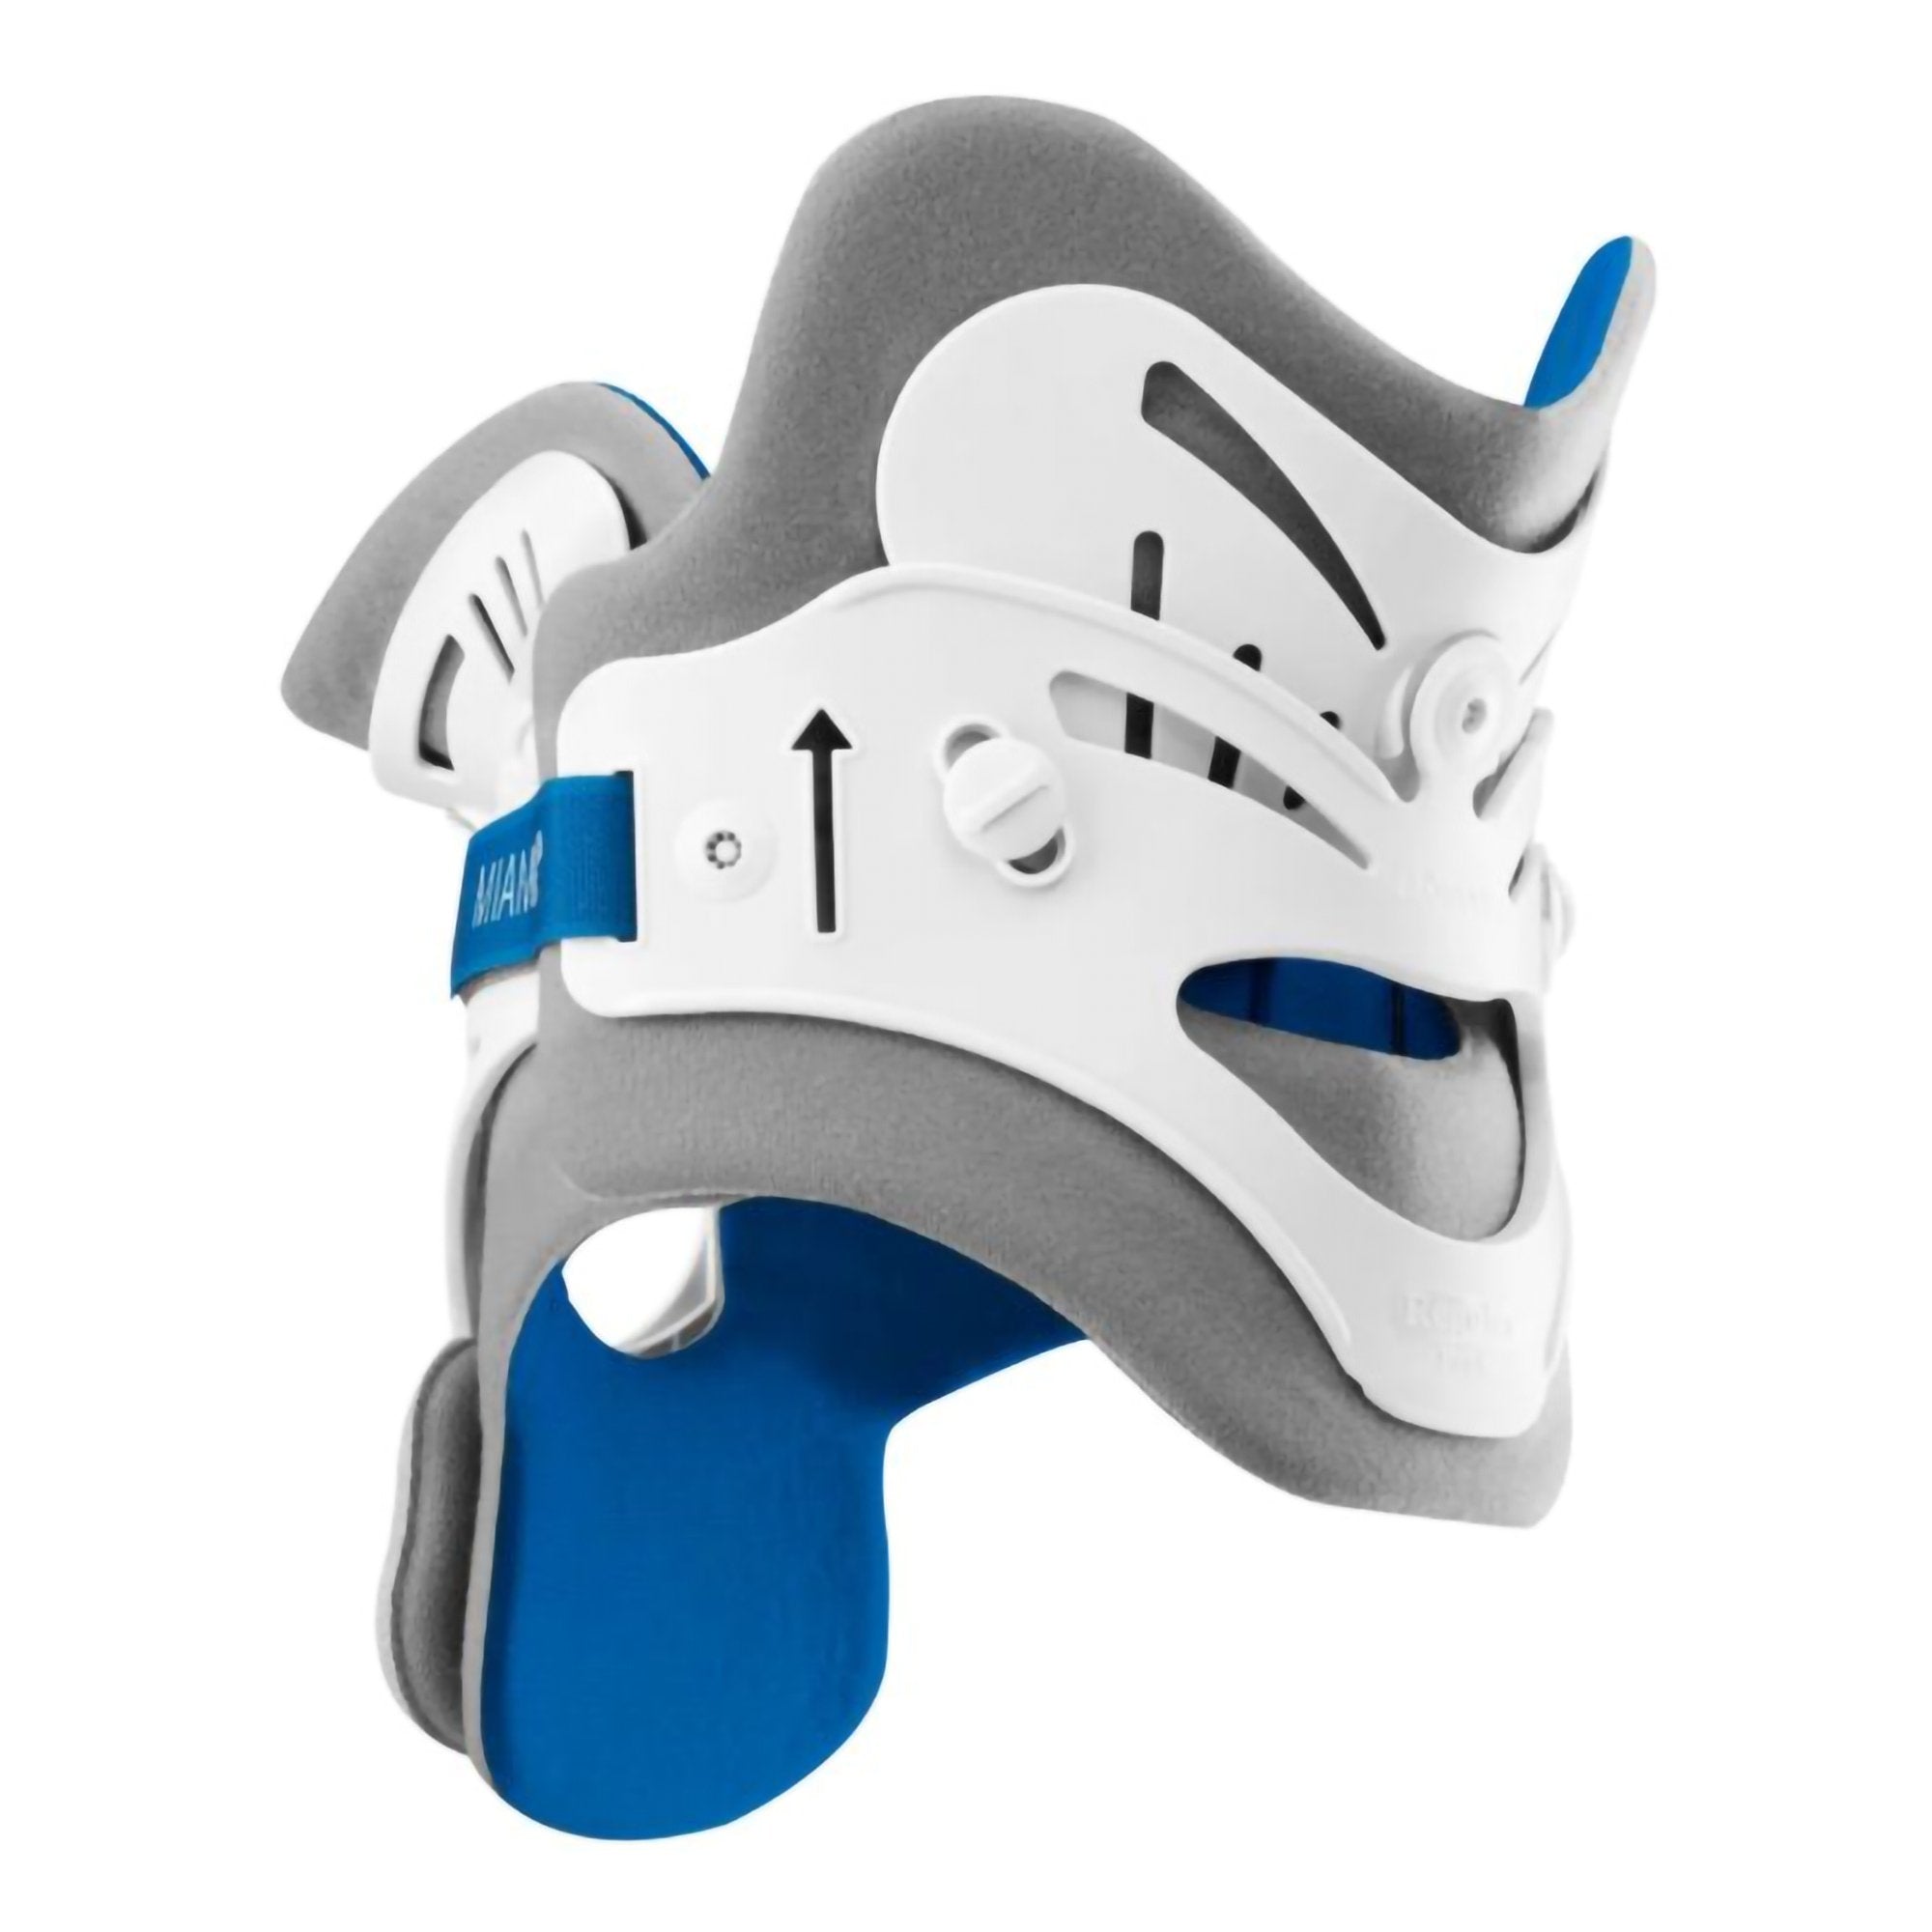 Rigid Cervical Collar Miami J® Preformed Adult Bariatric Two-Piece / Trachea Opening